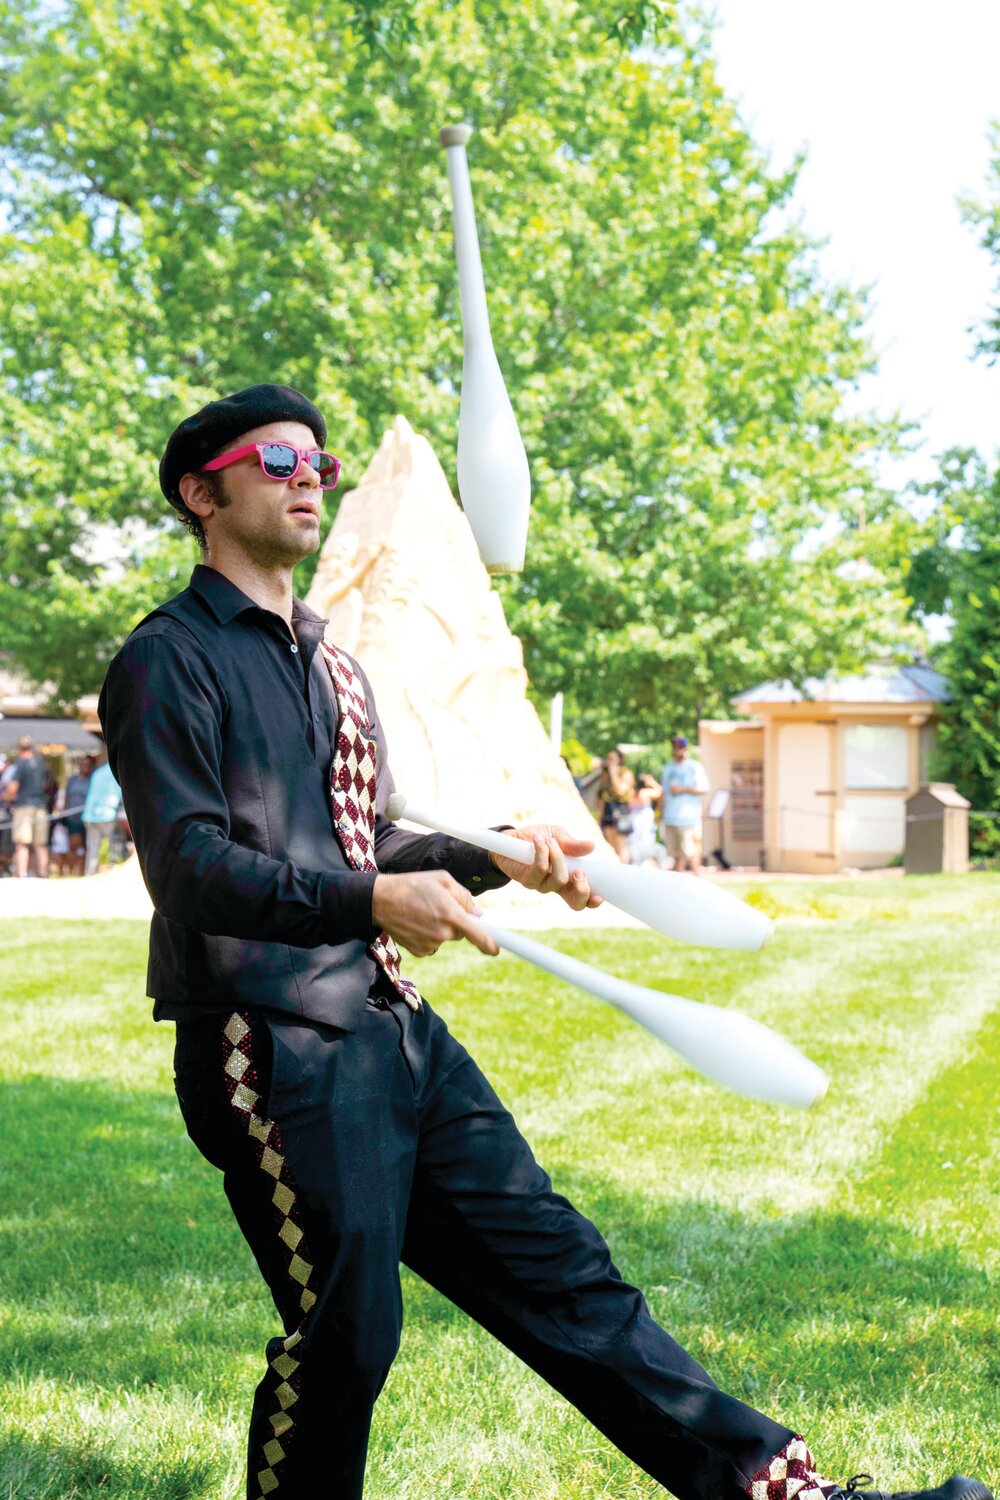 Ridiculous Nicolas juggles and entertains his way through the 2023 Peddler’s Village Peach Festival.